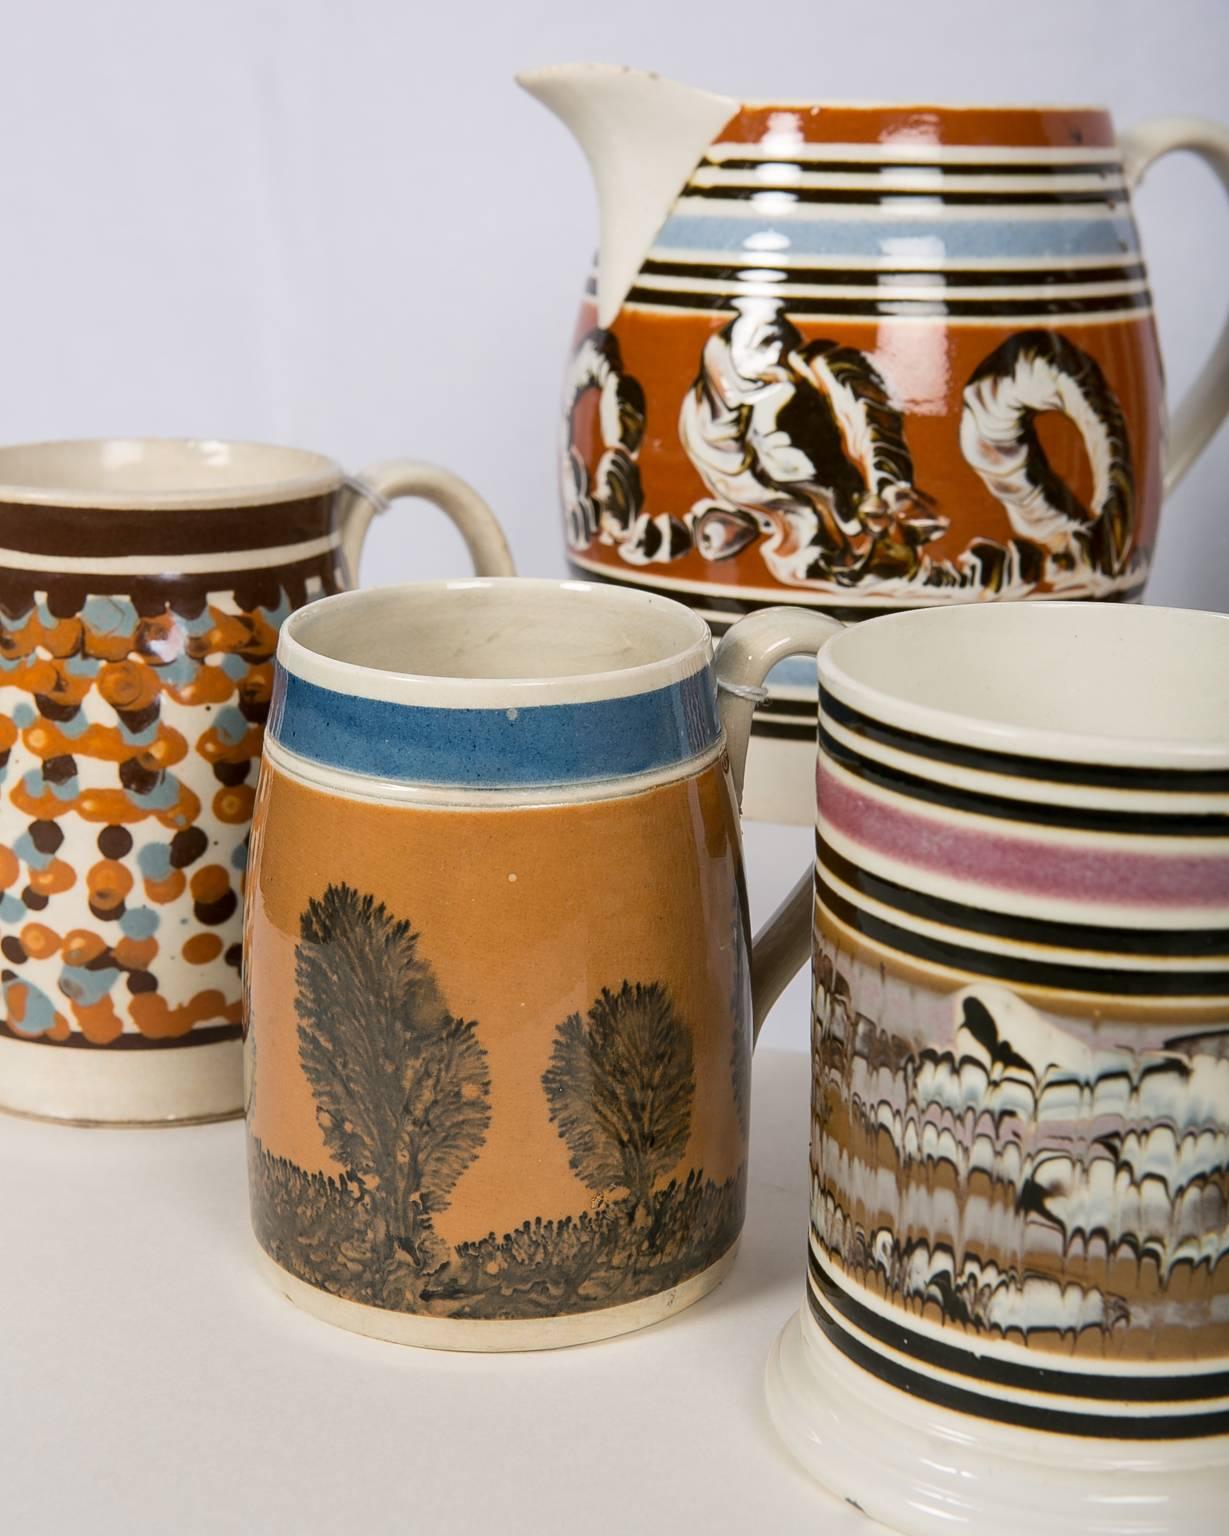 A collection of outstanding English Mochaware mugs and pitchers. The four mugs and three pitchers represent a variety of design which shows the individuality of Mochaware. Every piece of Mochaware is unique. Each piece is strikingly different, but